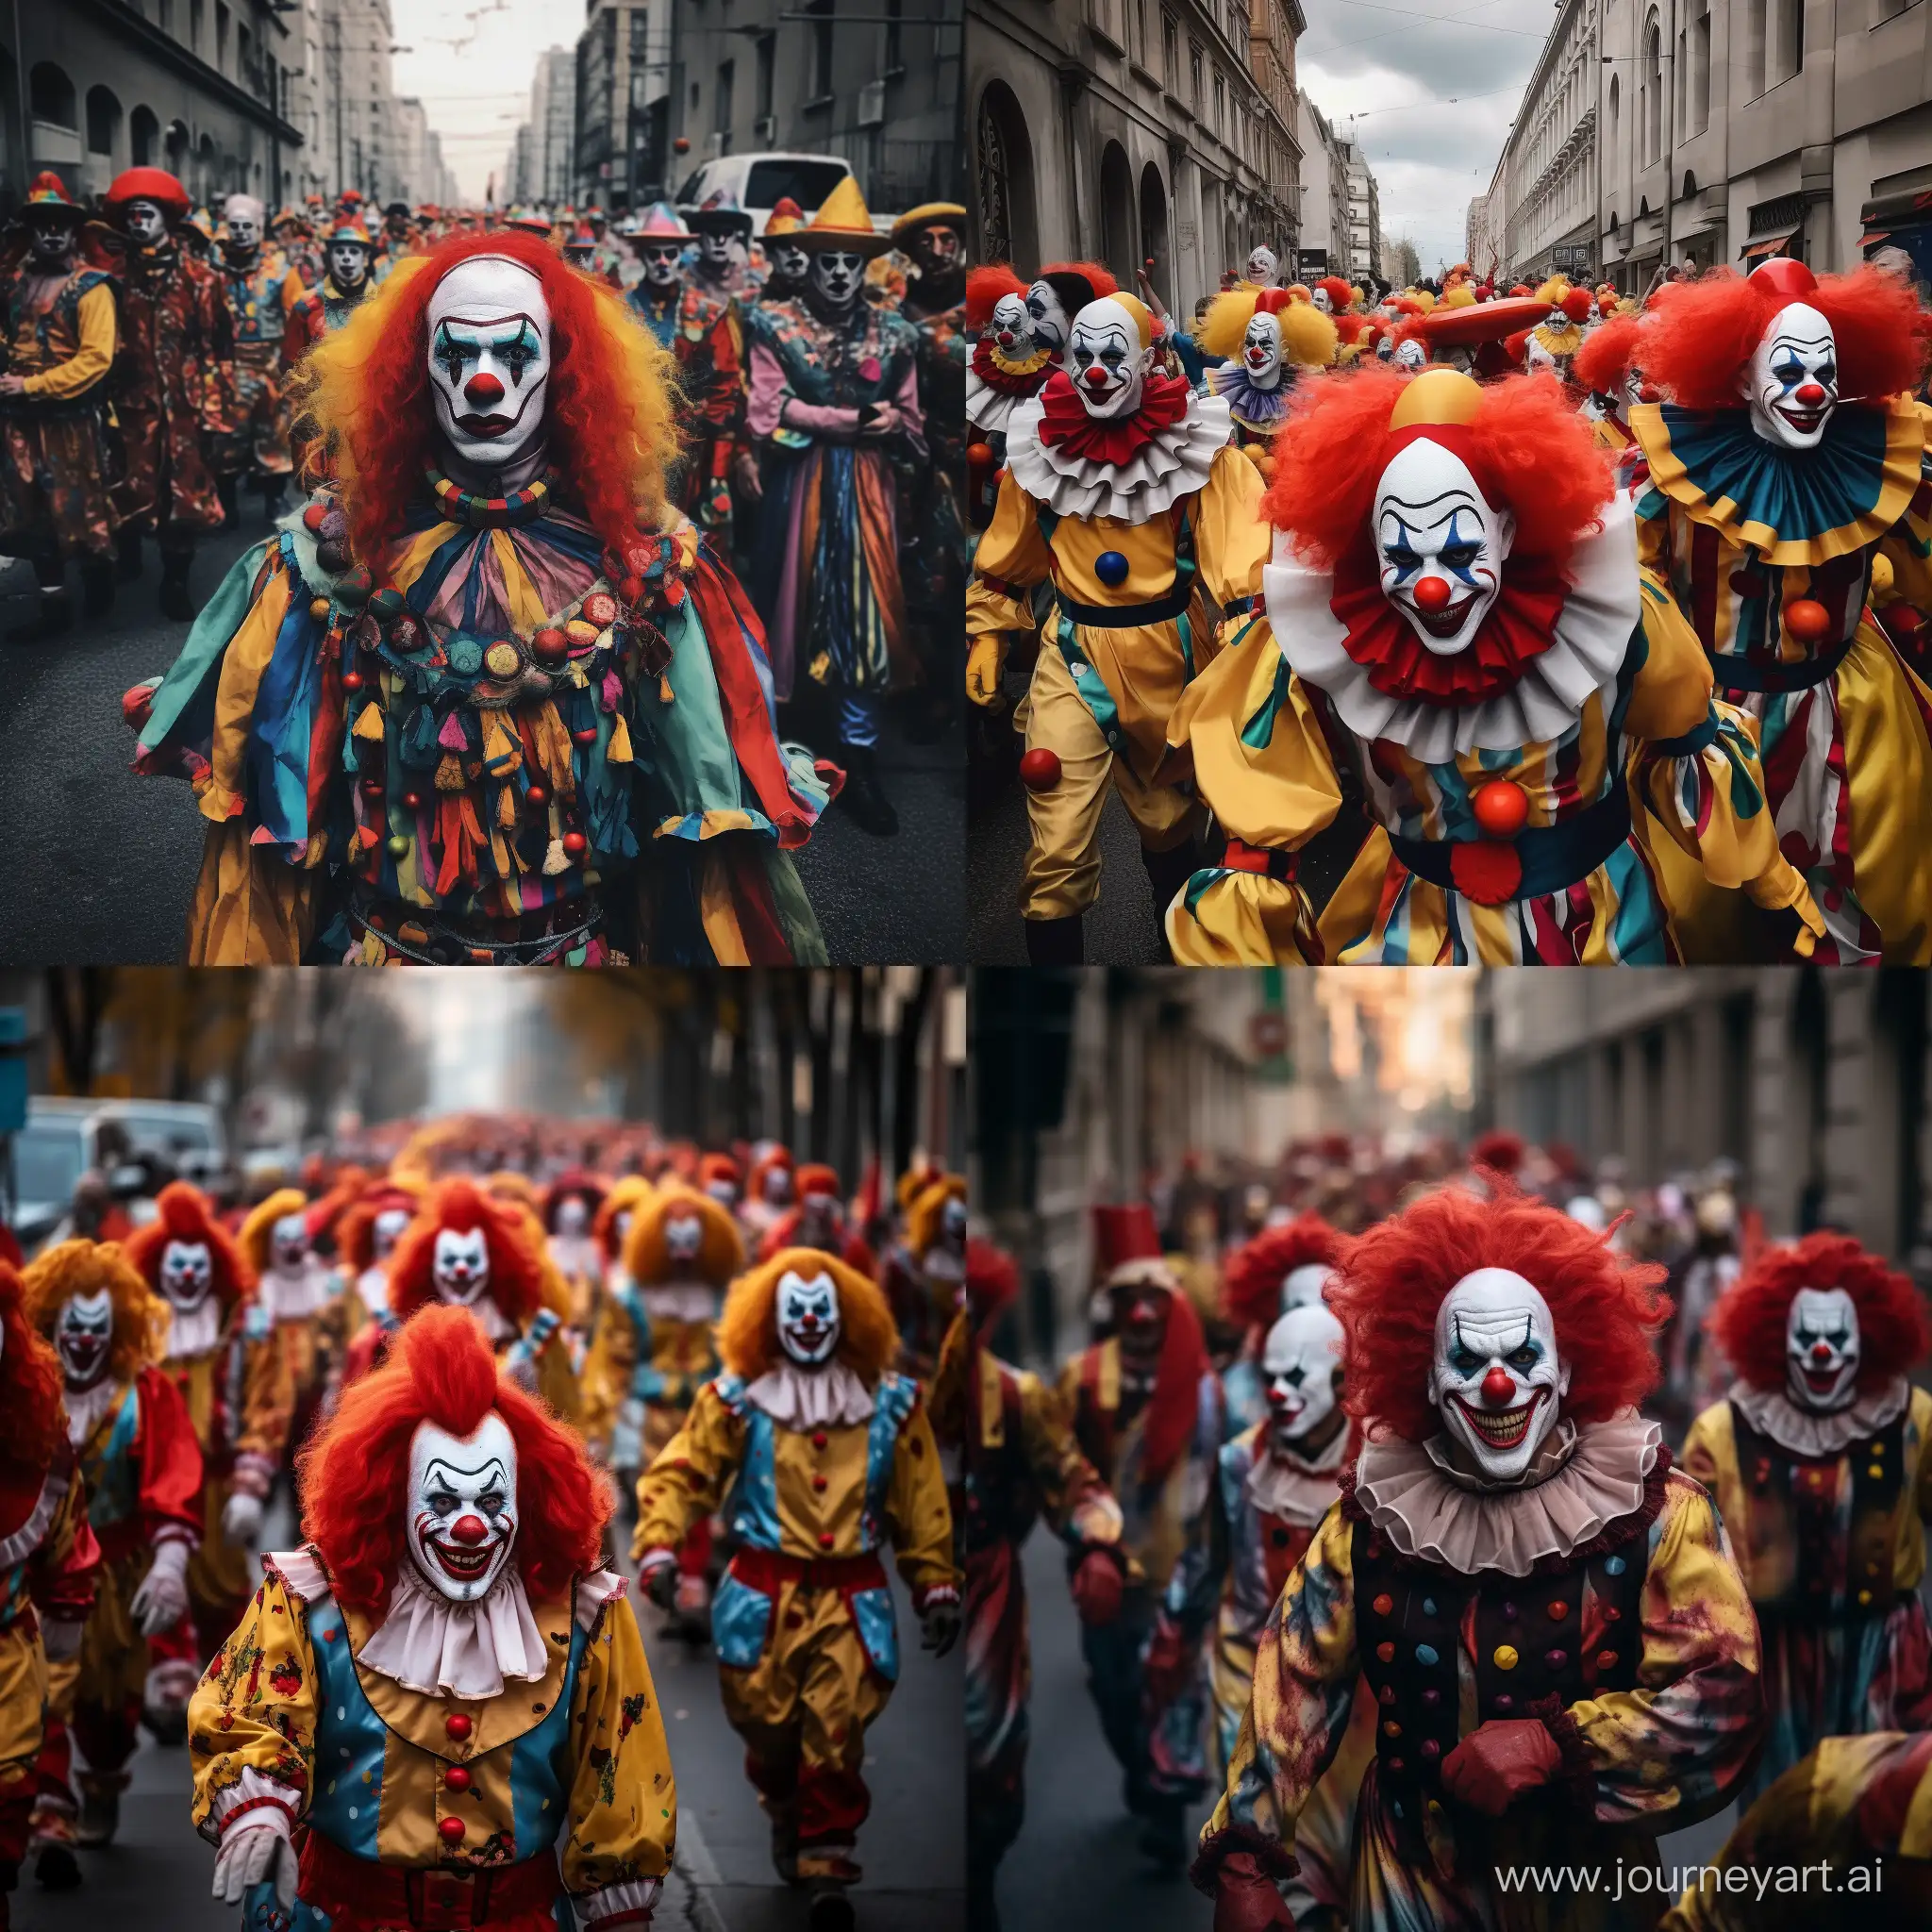 Colorful-Clown-Parade-Captured-in-a-Vibrant-11-Photo